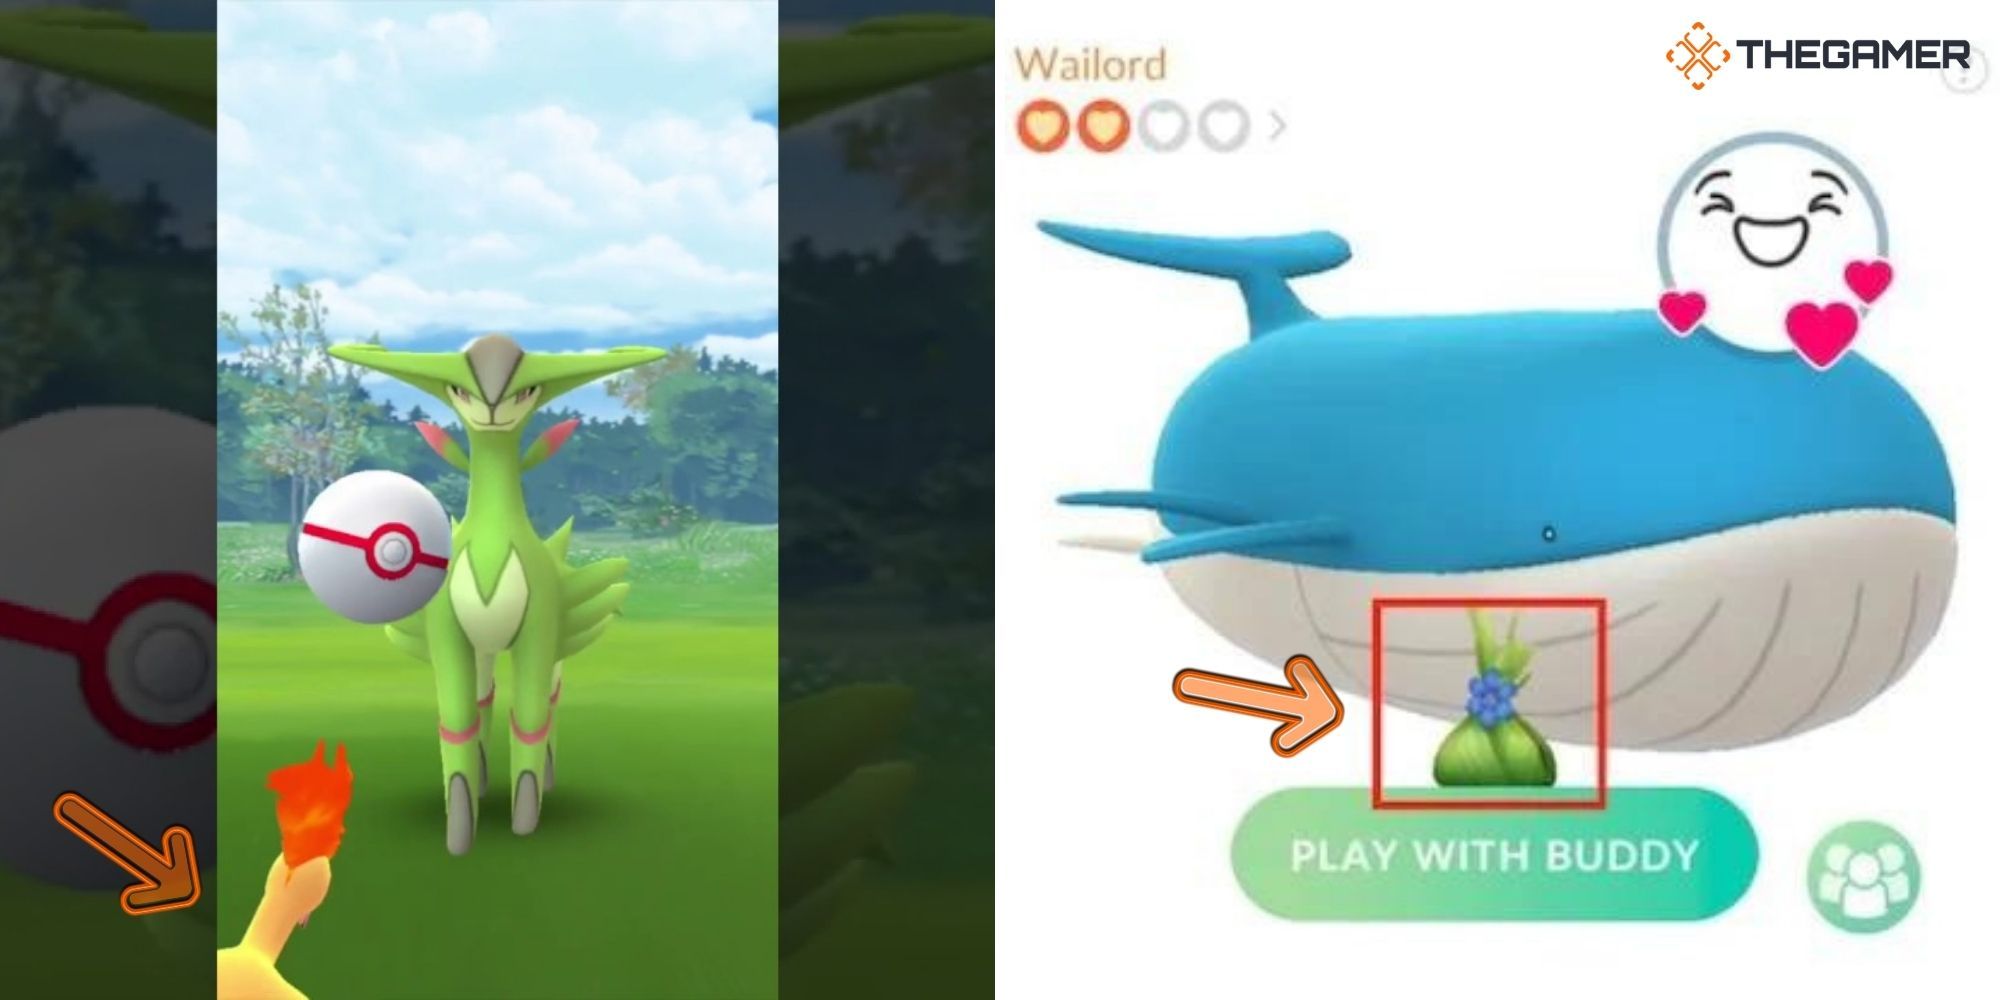 Pokemon Go - Buddy Pokemon (instructional image) (left catch assist in action) (right present from waillord)